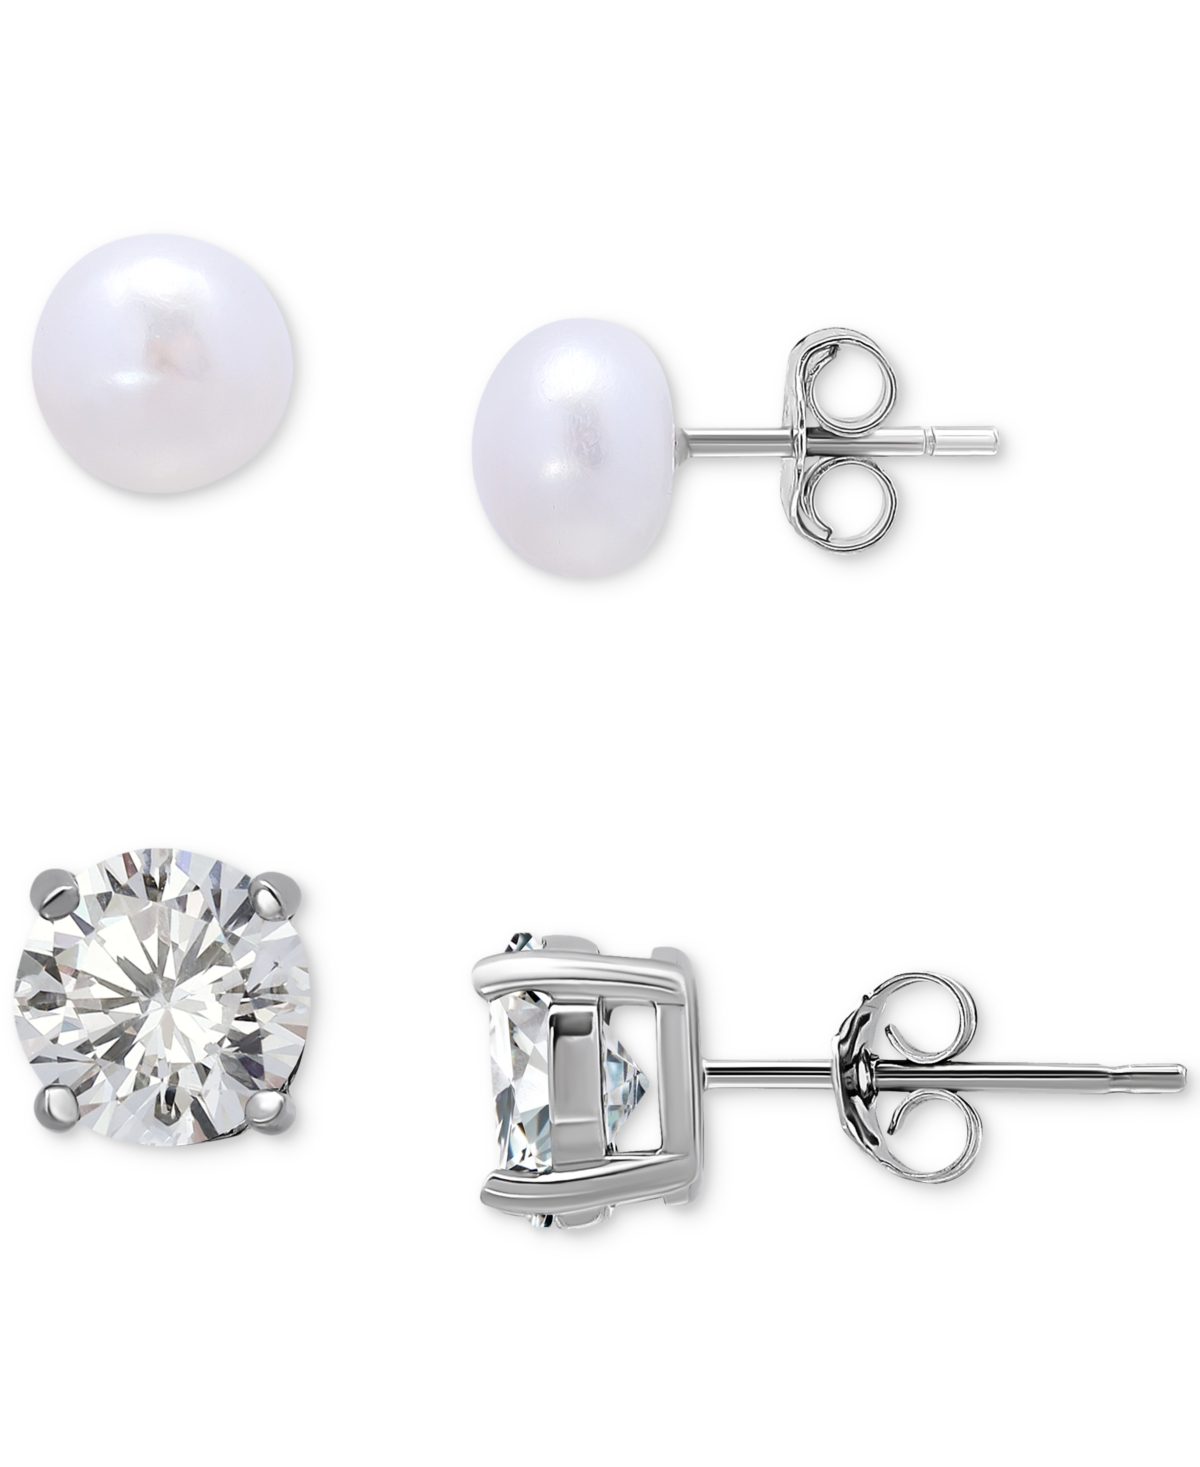 Giani Bernini 2-pc. Set Cultured Freshwater Pearl (7mm) & Cubic Zirconia Stud Earrings In Sterling Silver, Created